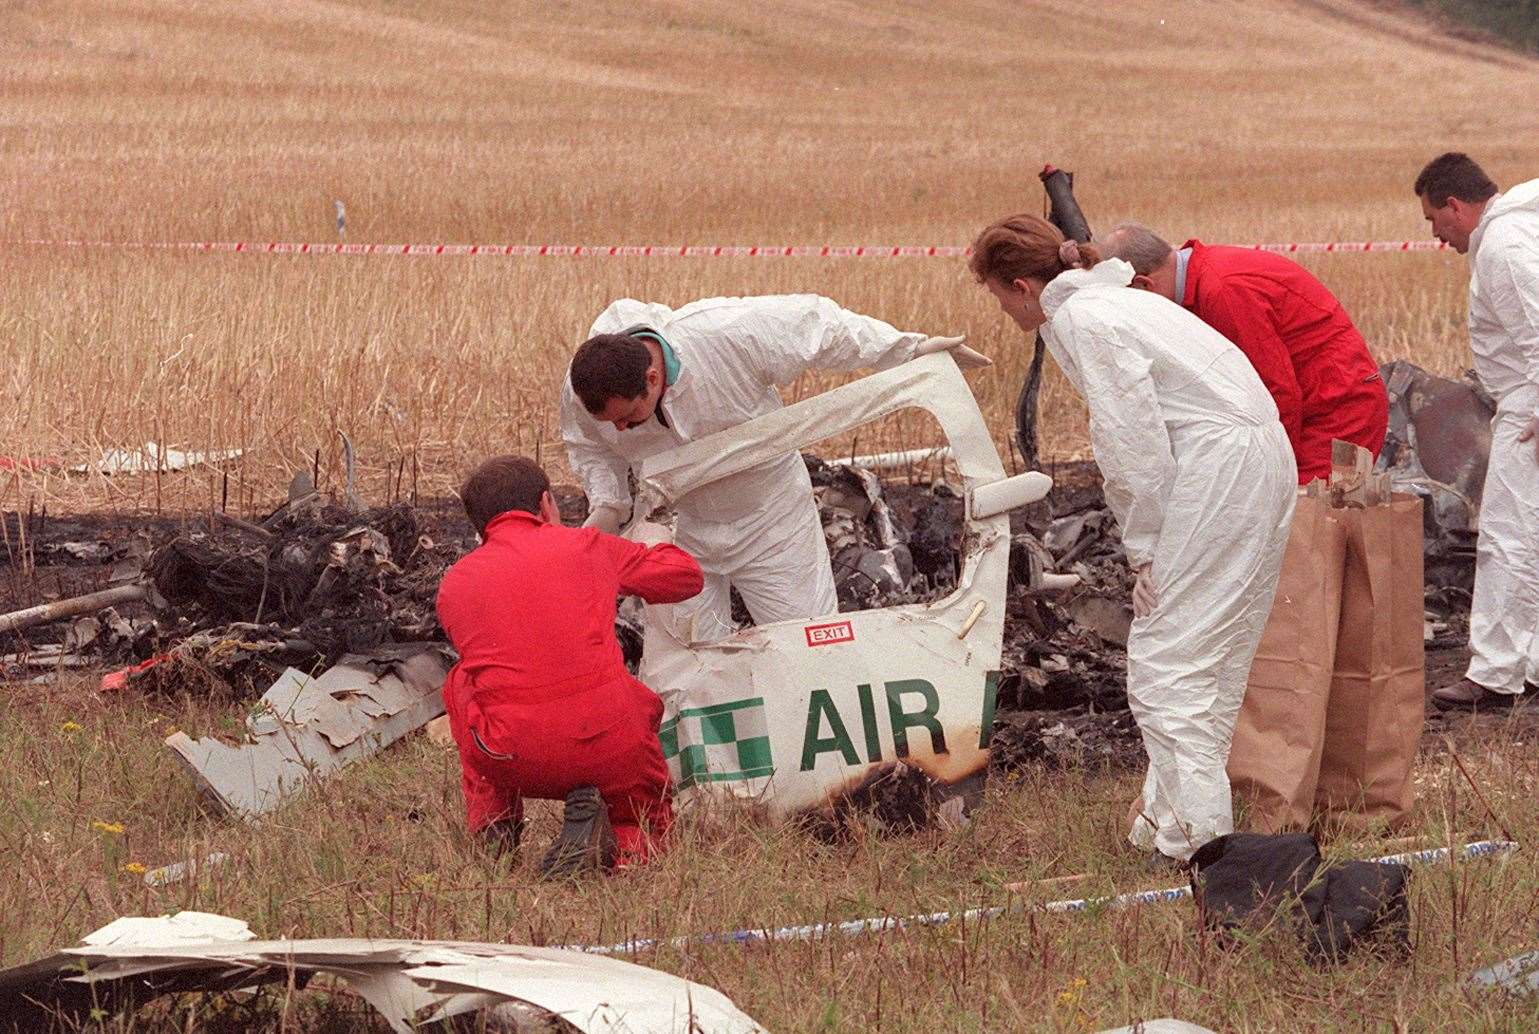 Wreckage from the crash of the air ambulance in 1998